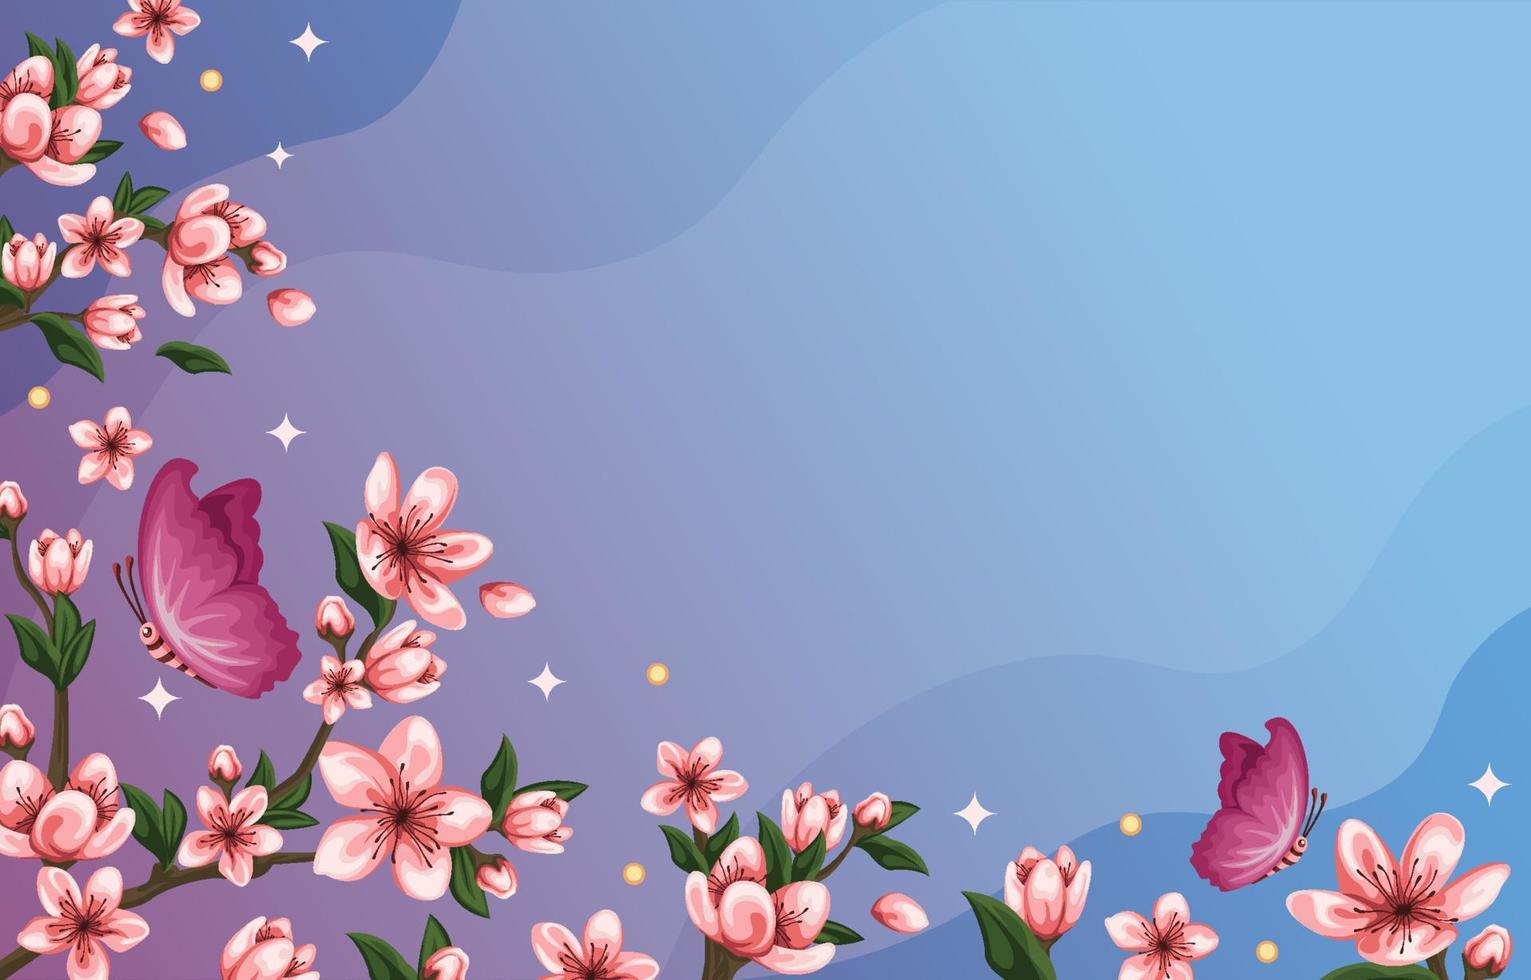 Butterflies and Peach Blossom Background vector